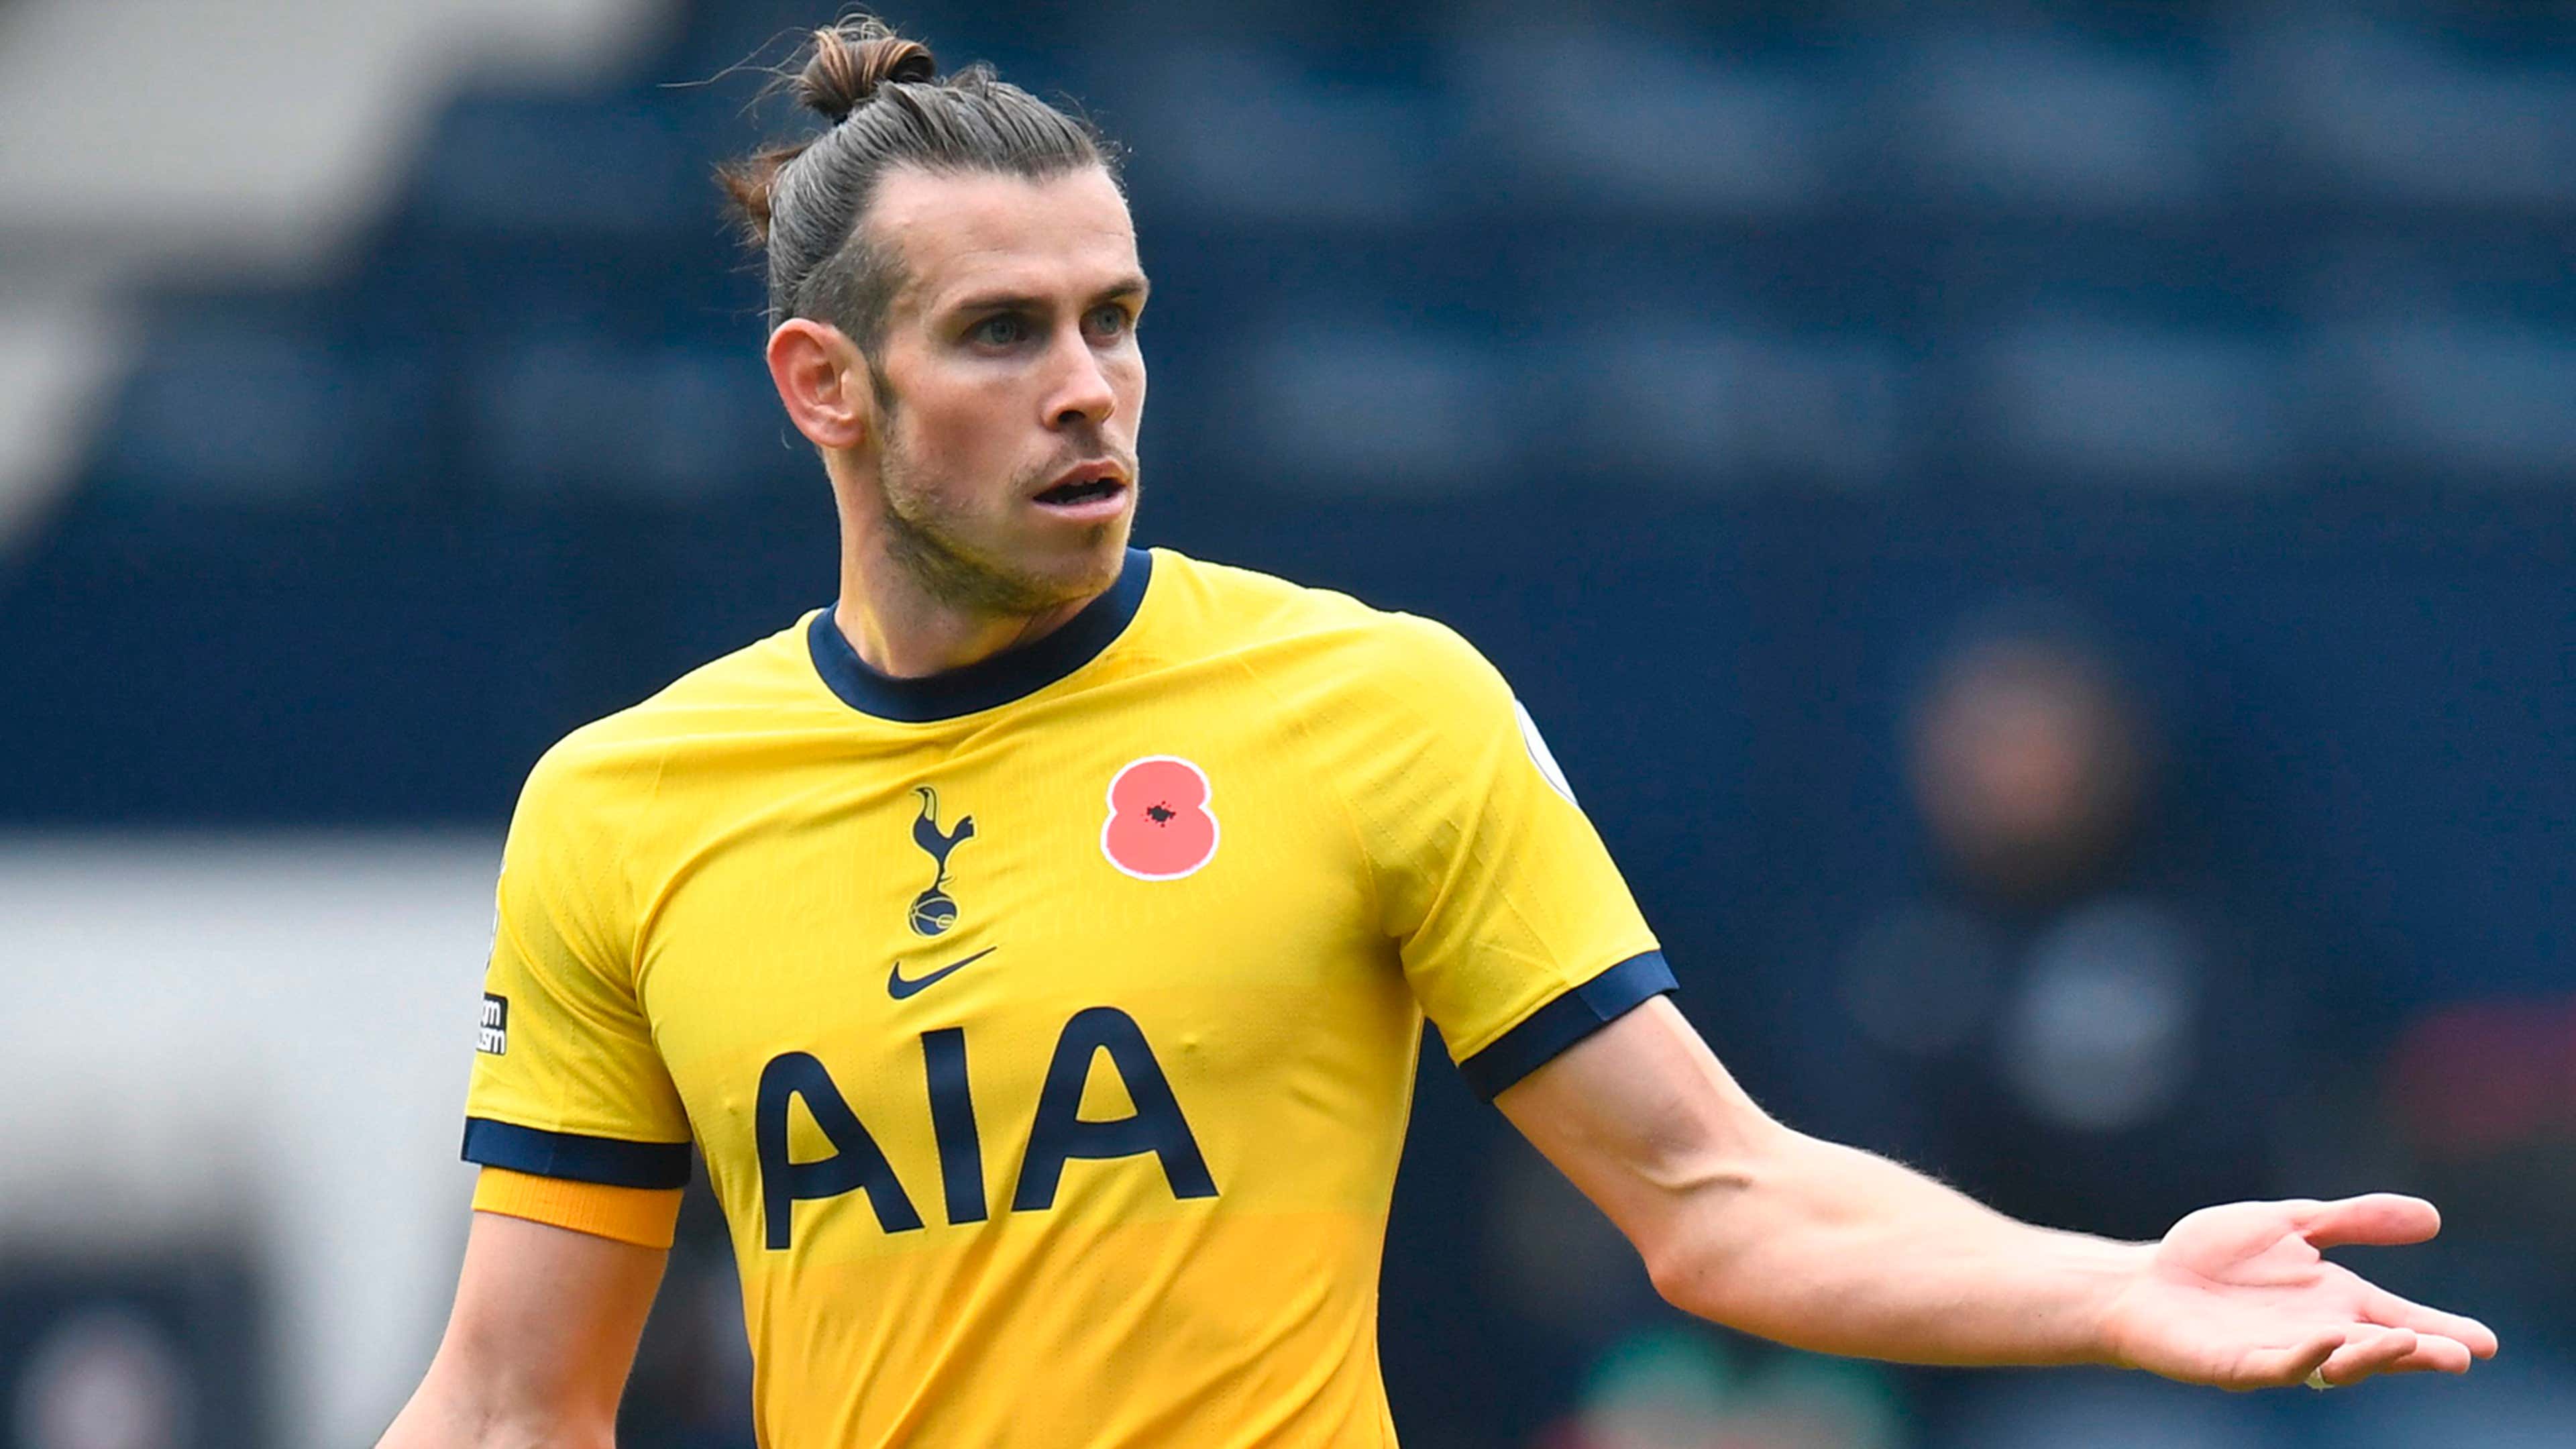 Gareth Bale takes new shirt number at Tottenham after return to